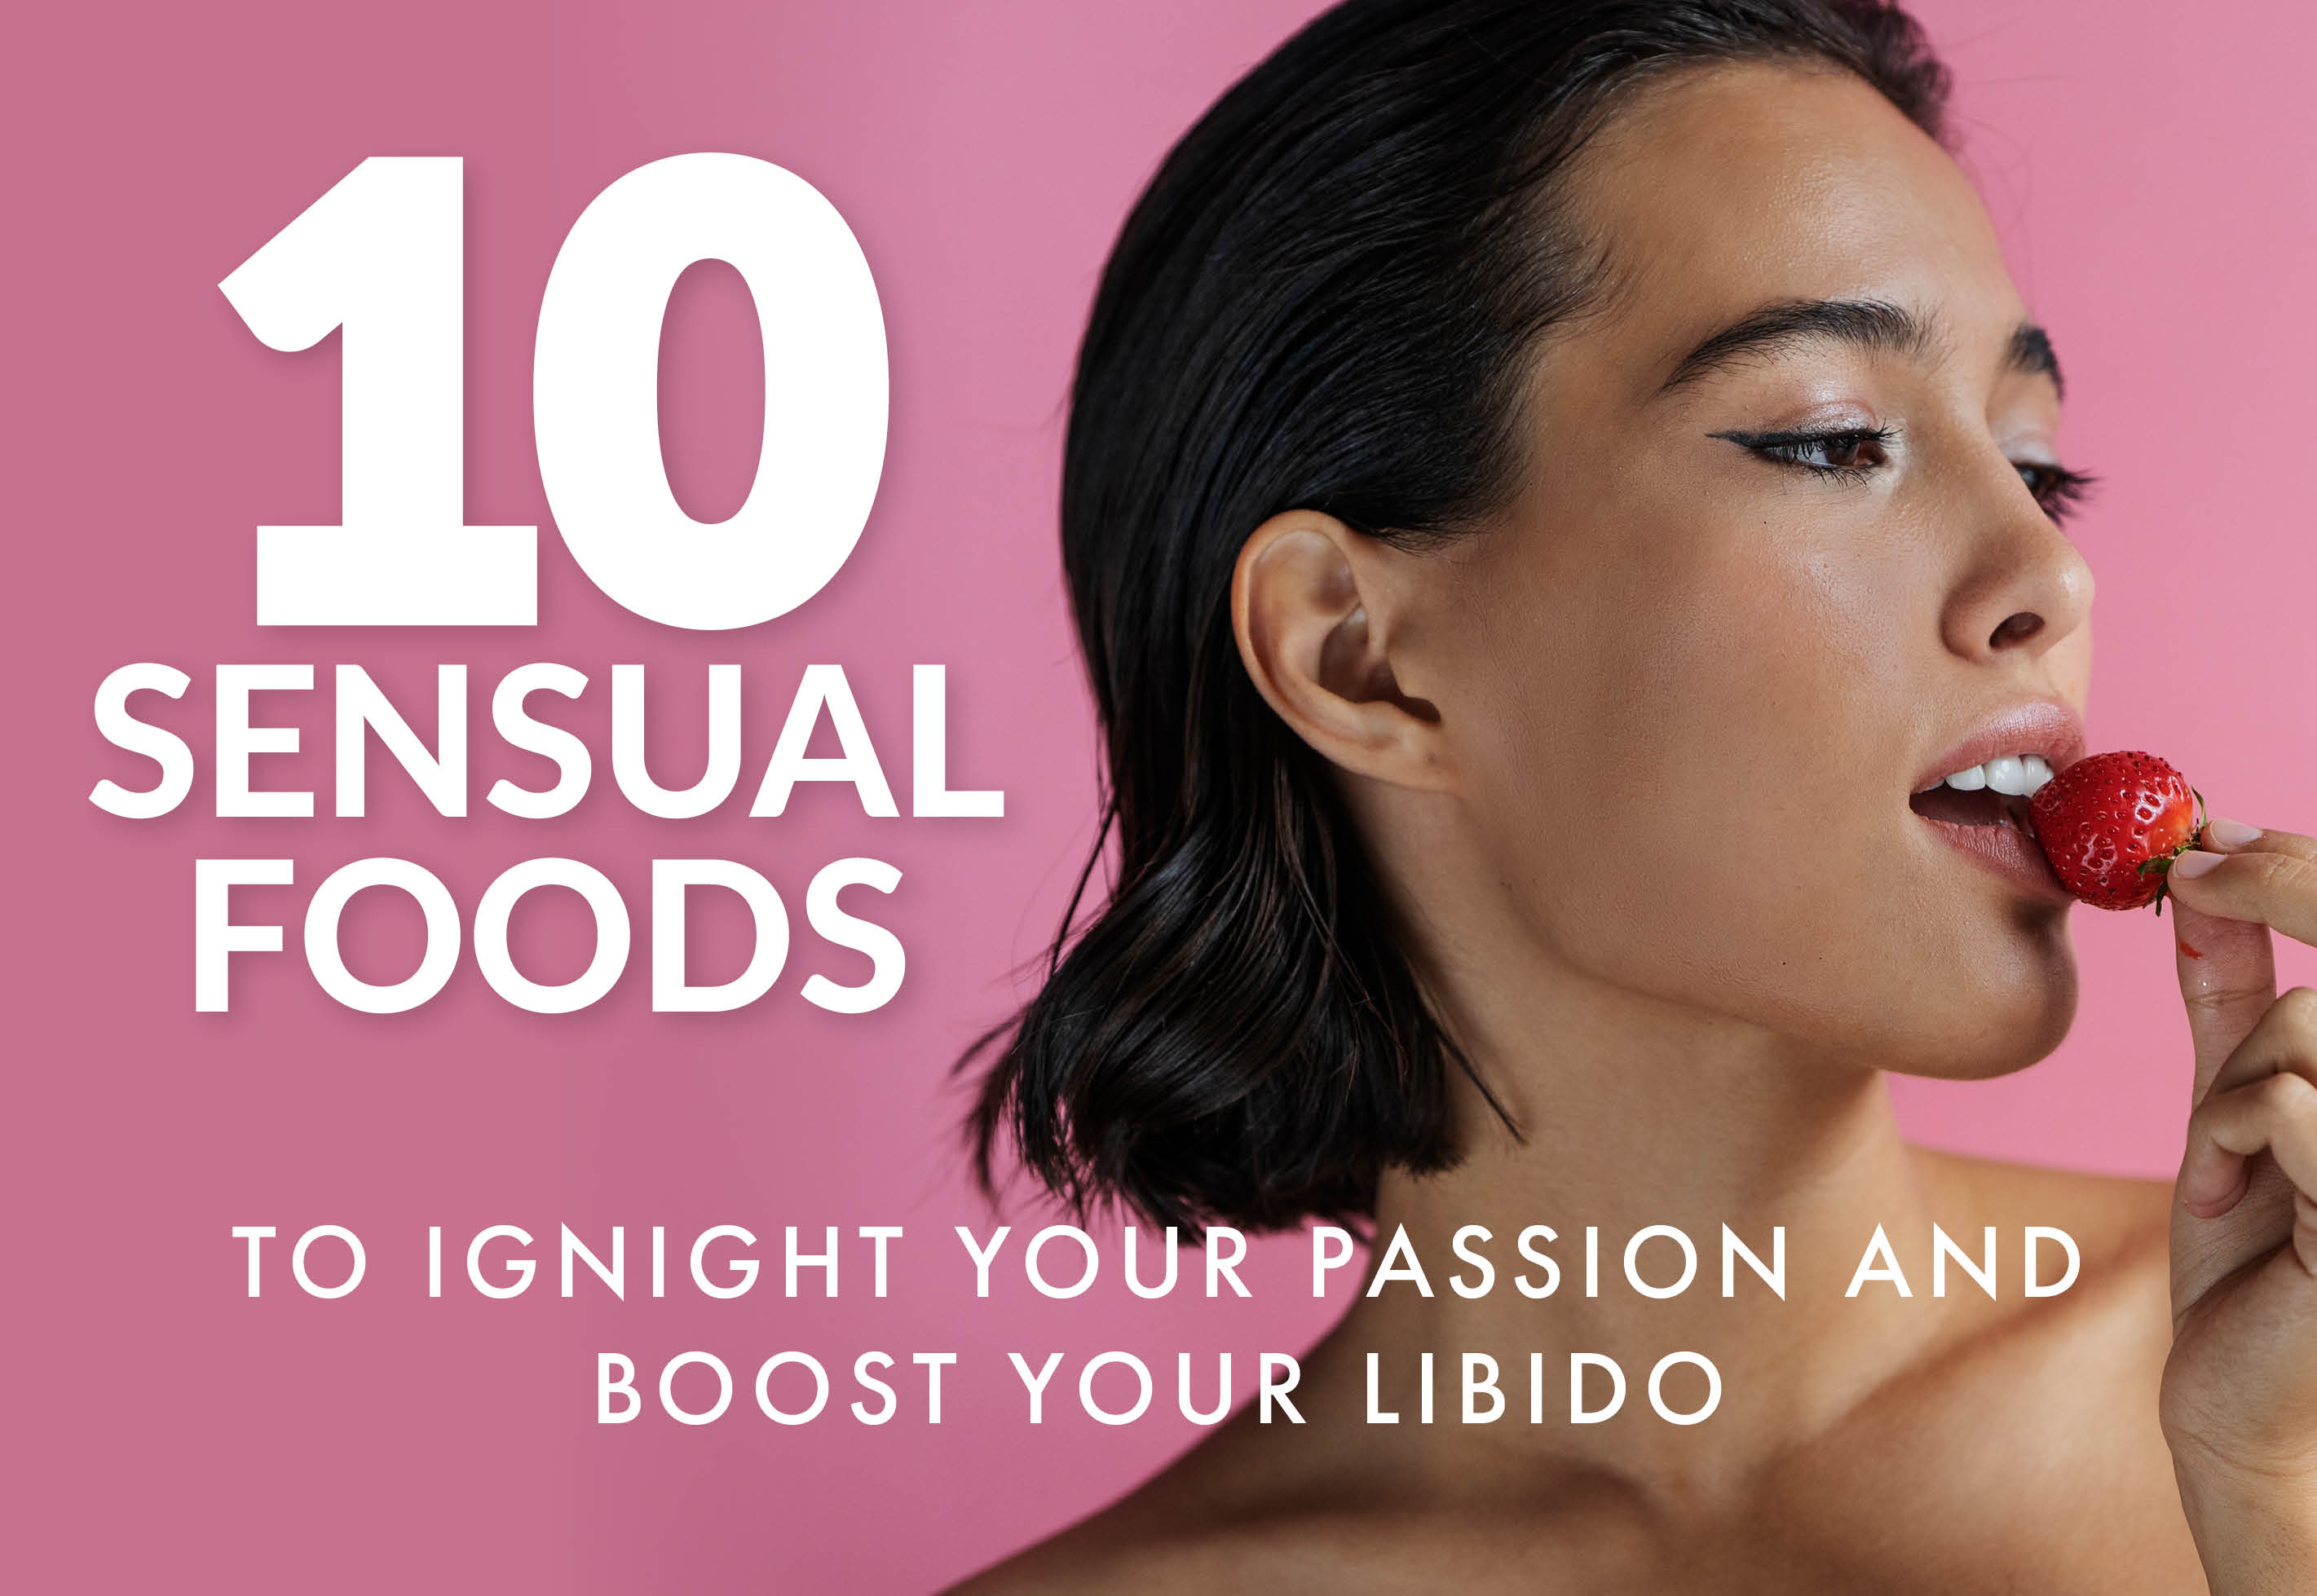 10 Sensual Foods to Ignite Your Passion and Boost Your Libido - main image